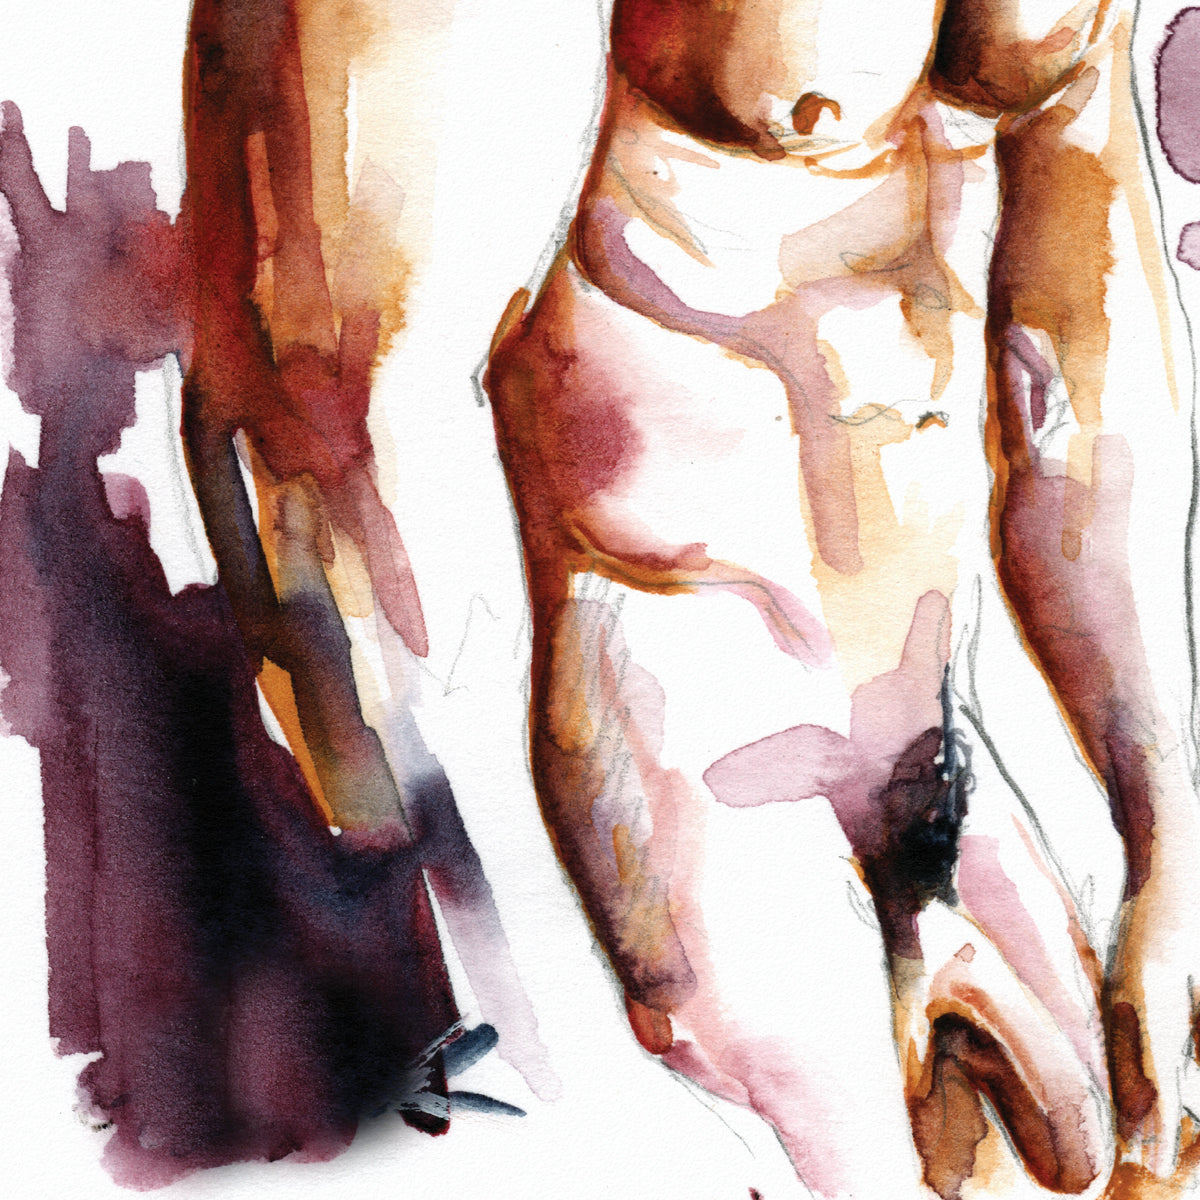 Watercolor Reverie of the Male Form - Nude Muscular Elegance Giclee Art Print